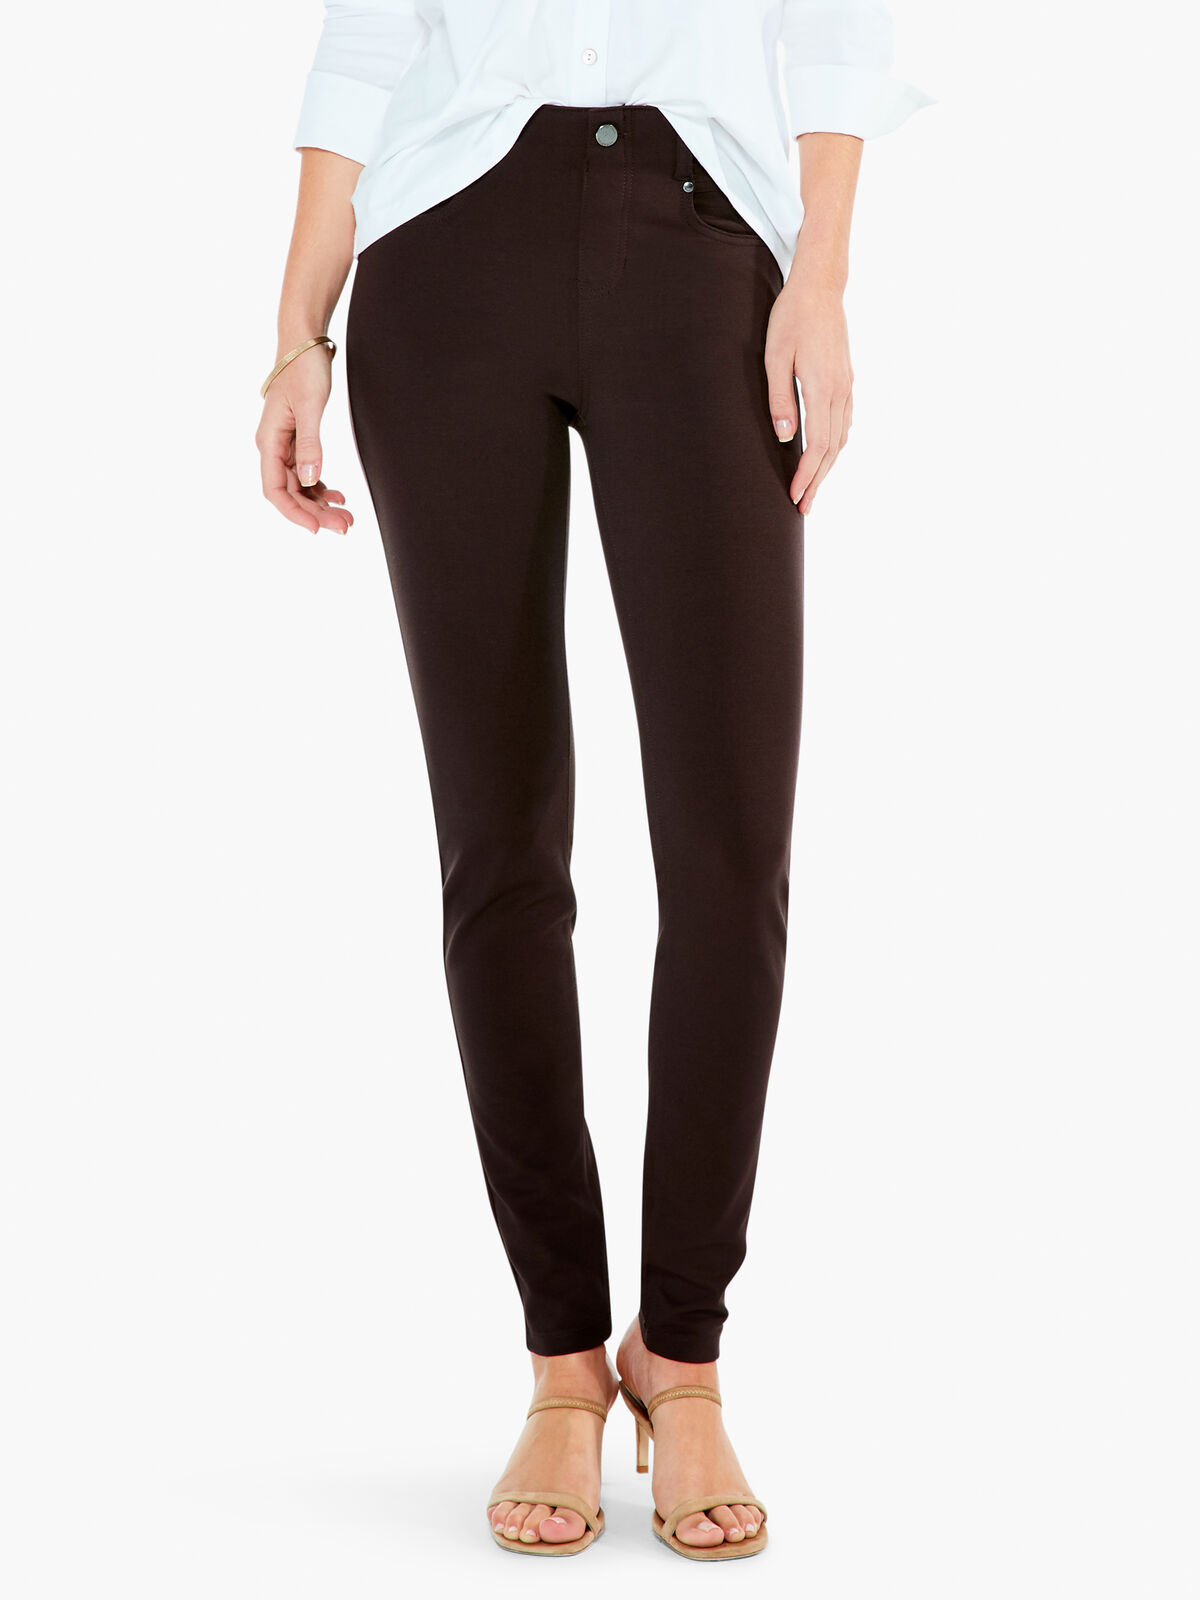 Liverpool - Gia Glider Skinny Knit Pant